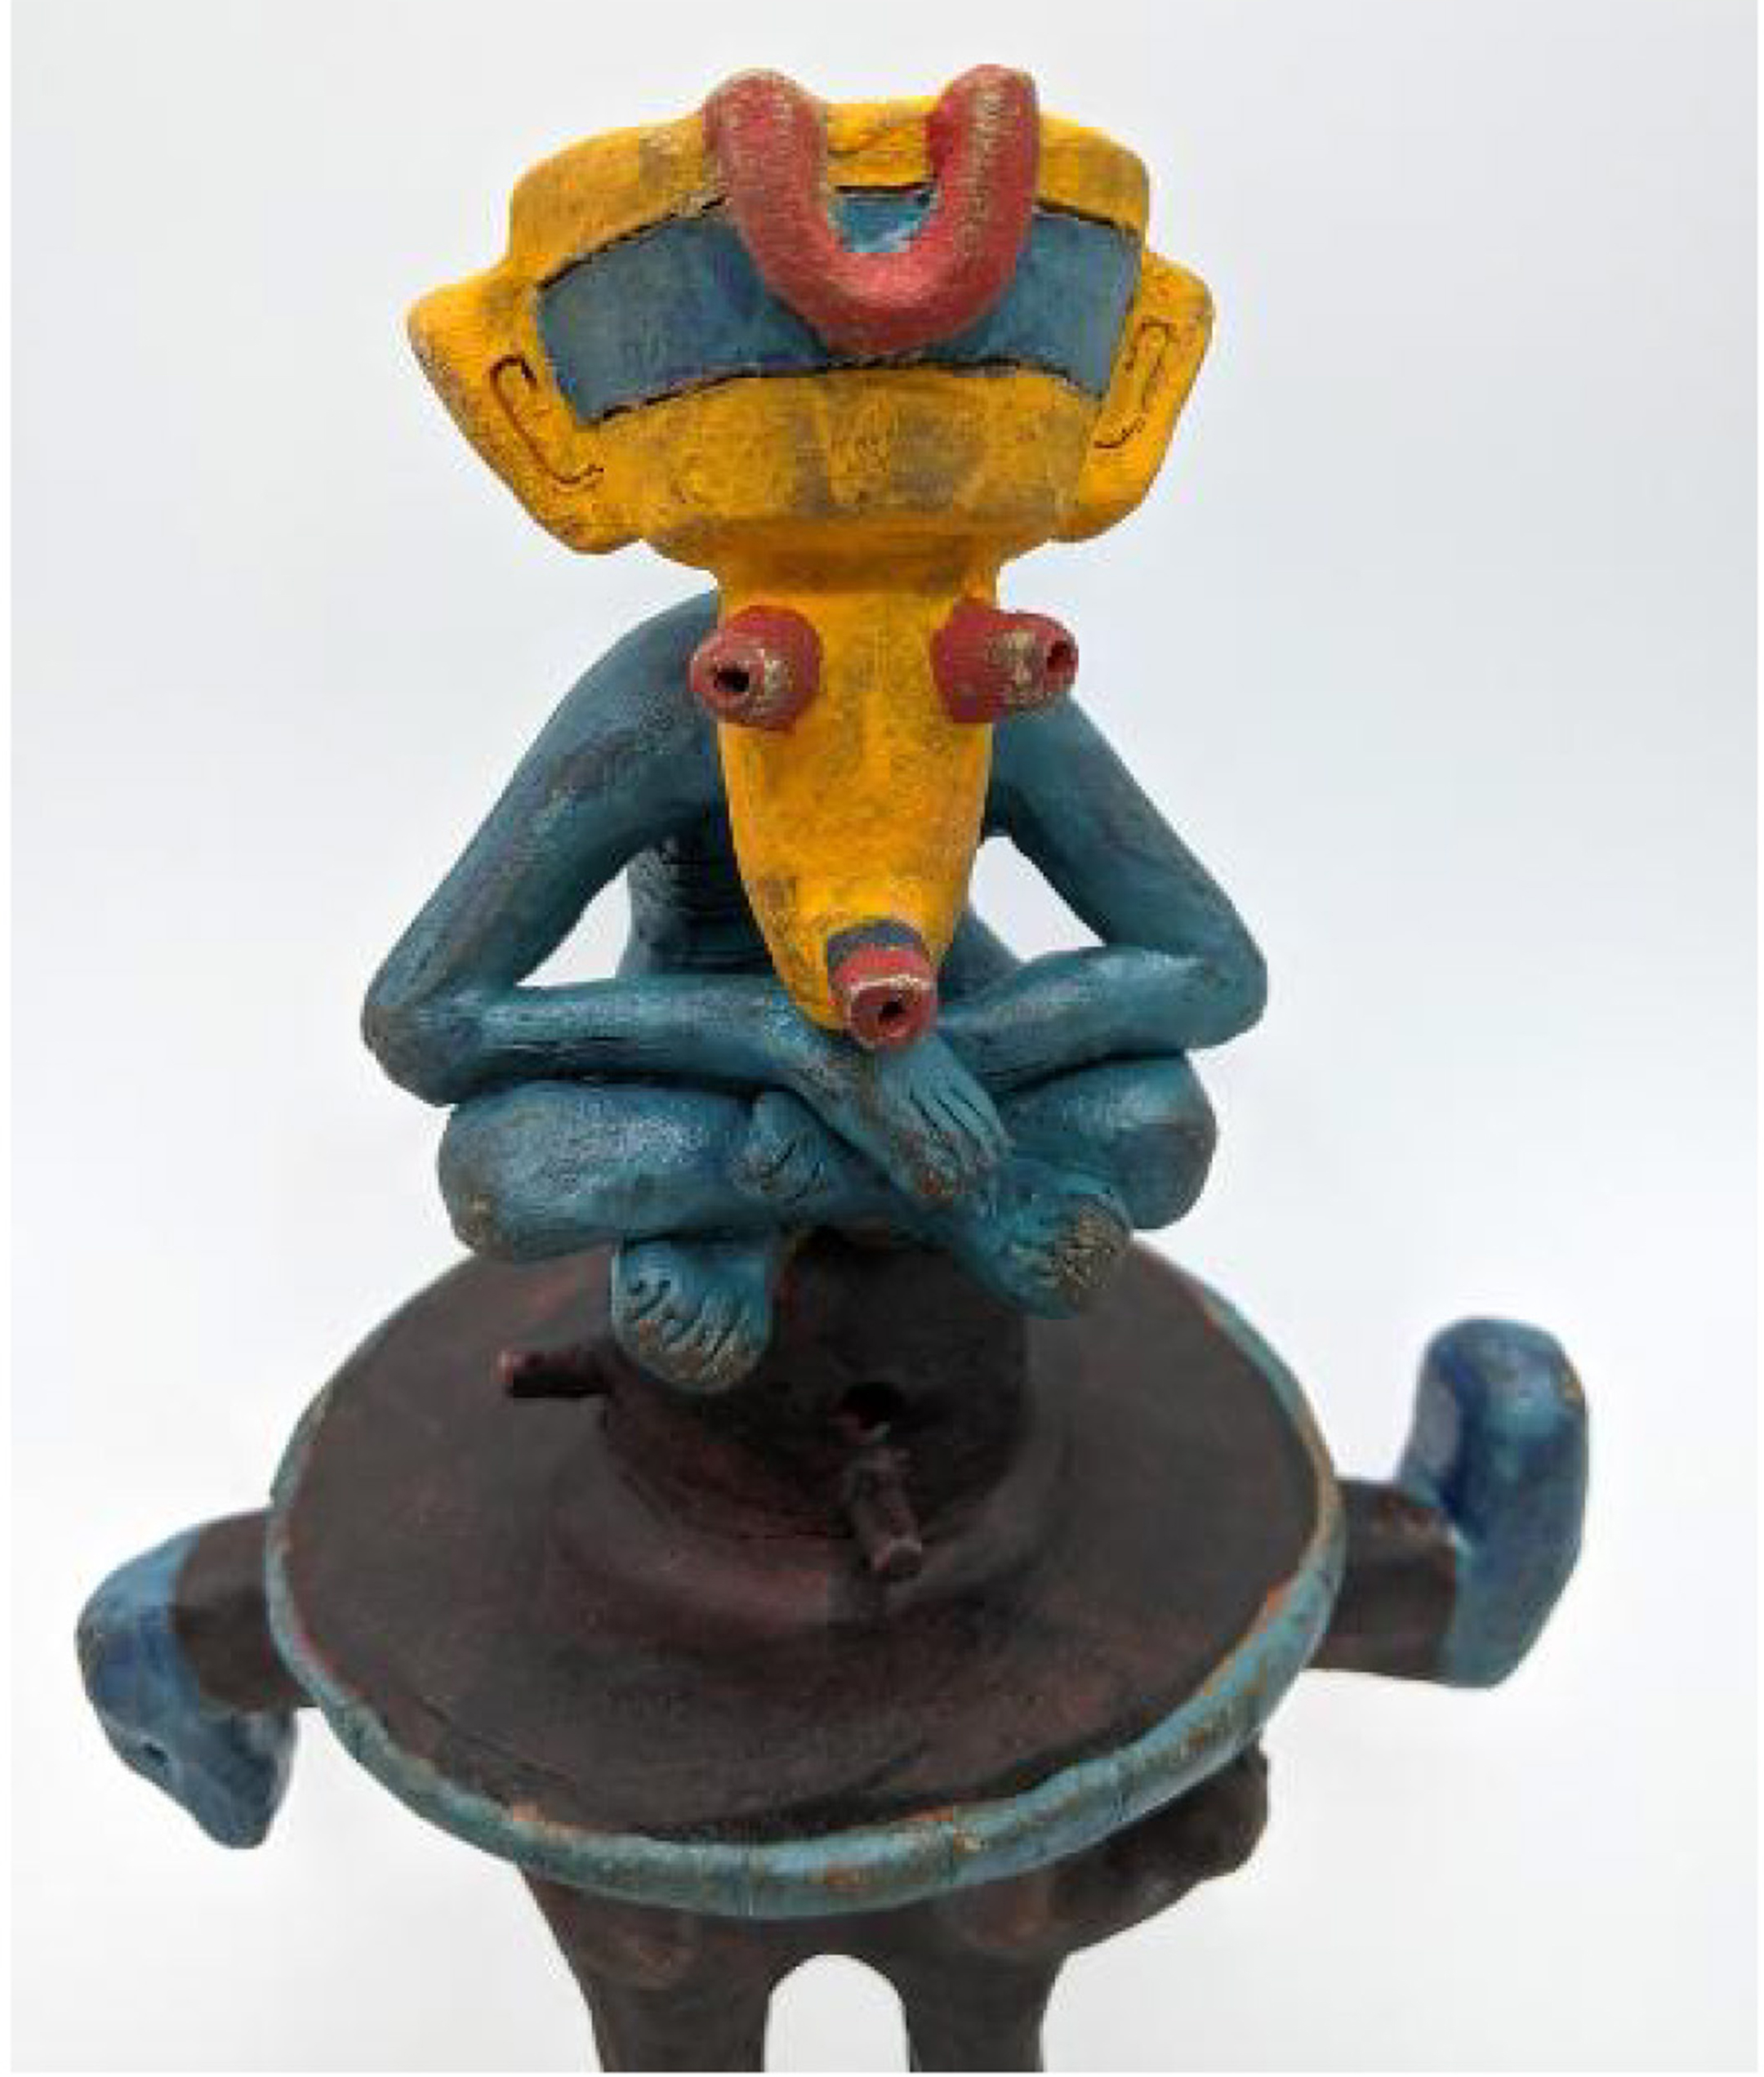 Sculpture of a seated green creature with yellow face and red eyes 